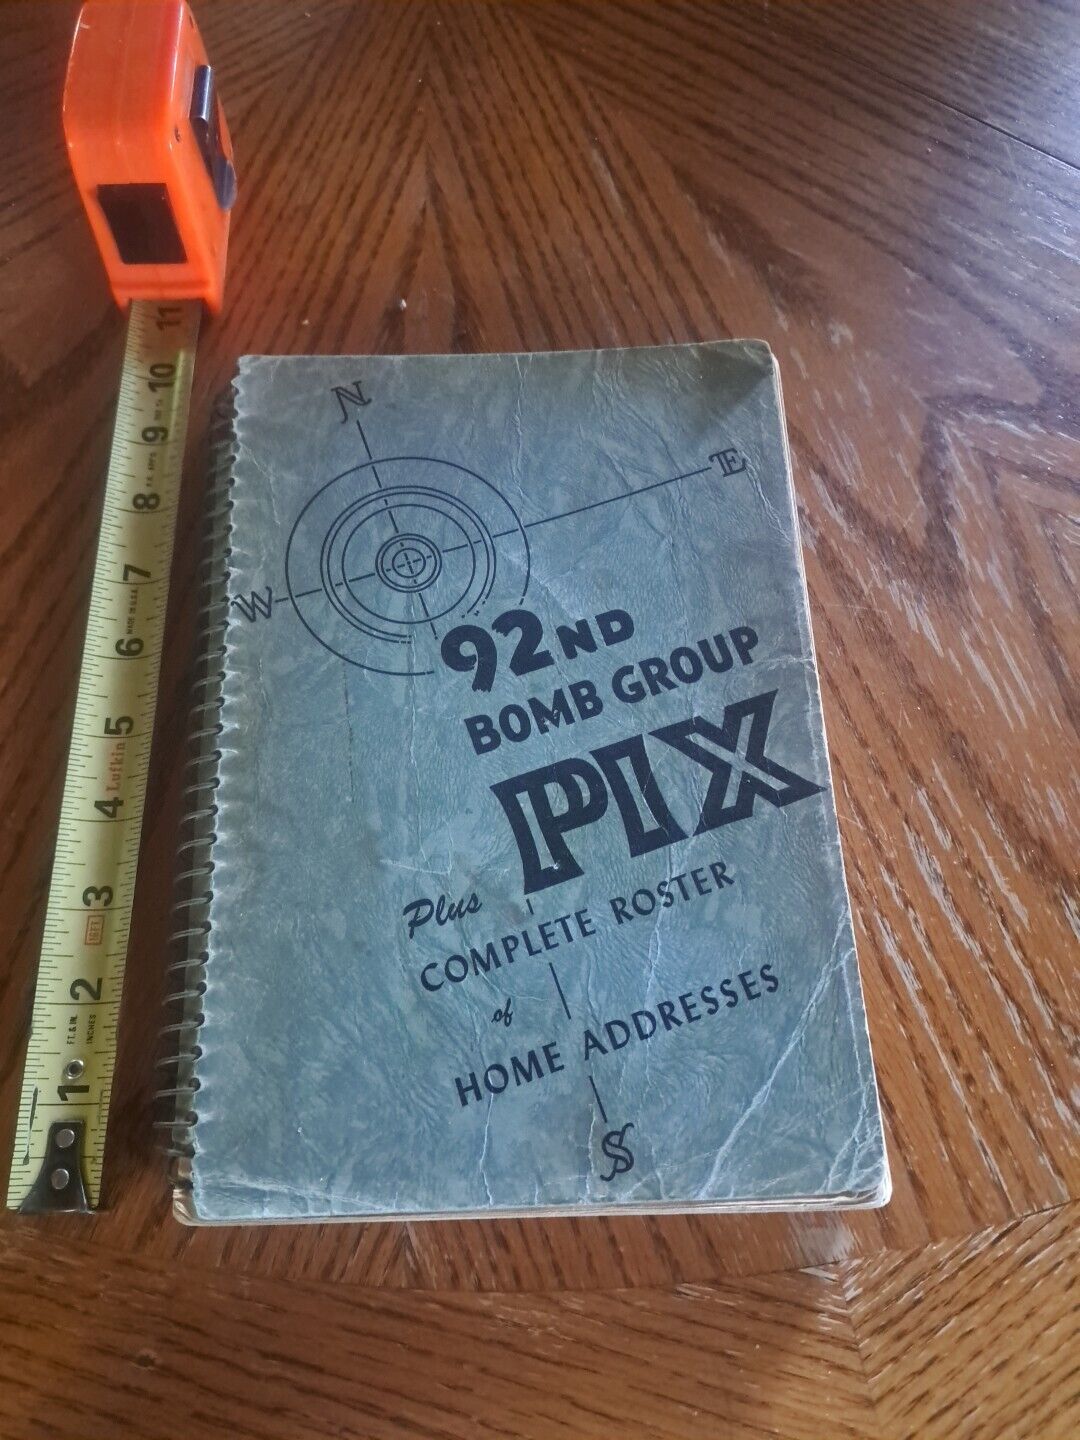 92nd BOMB GROUP PIX PLUS COMPLETE ROSTER OF HOME ADDRESSES SPIRAL BOOK